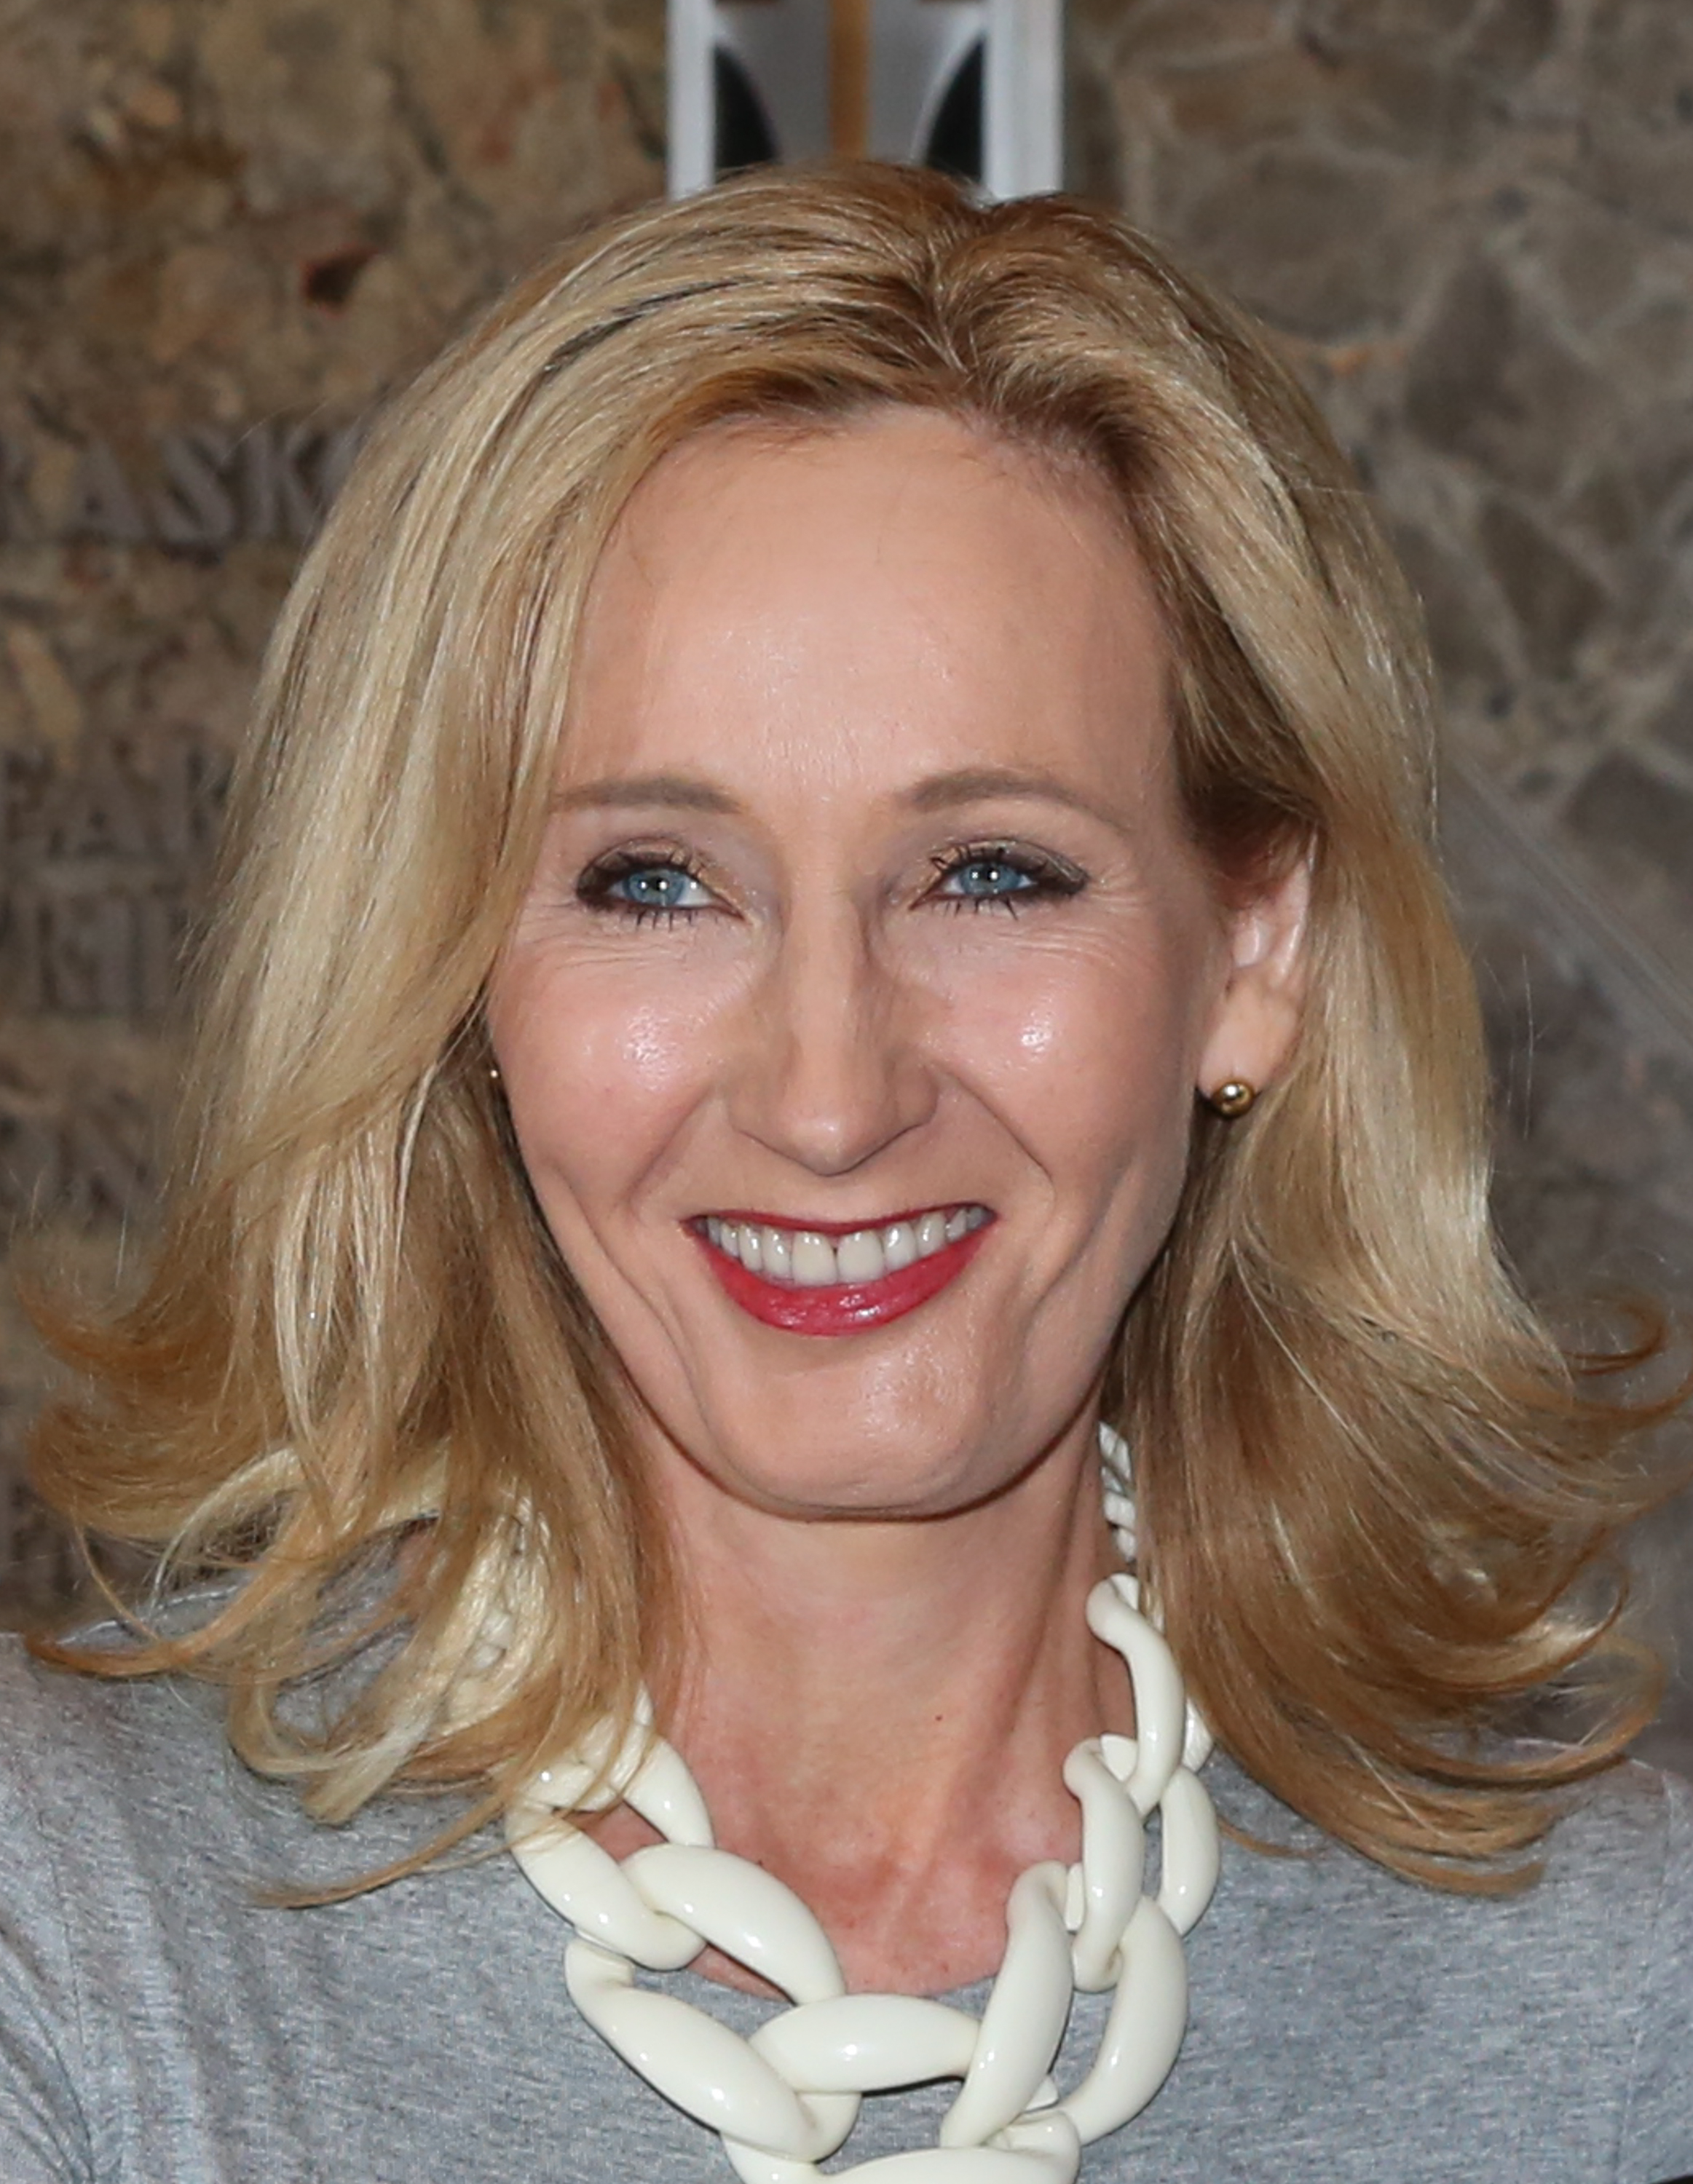 J.K. Rowling at the USA launch of her non-profit children's organization, Lumos, at The Empire State Building in New York City on April 9, 2015.